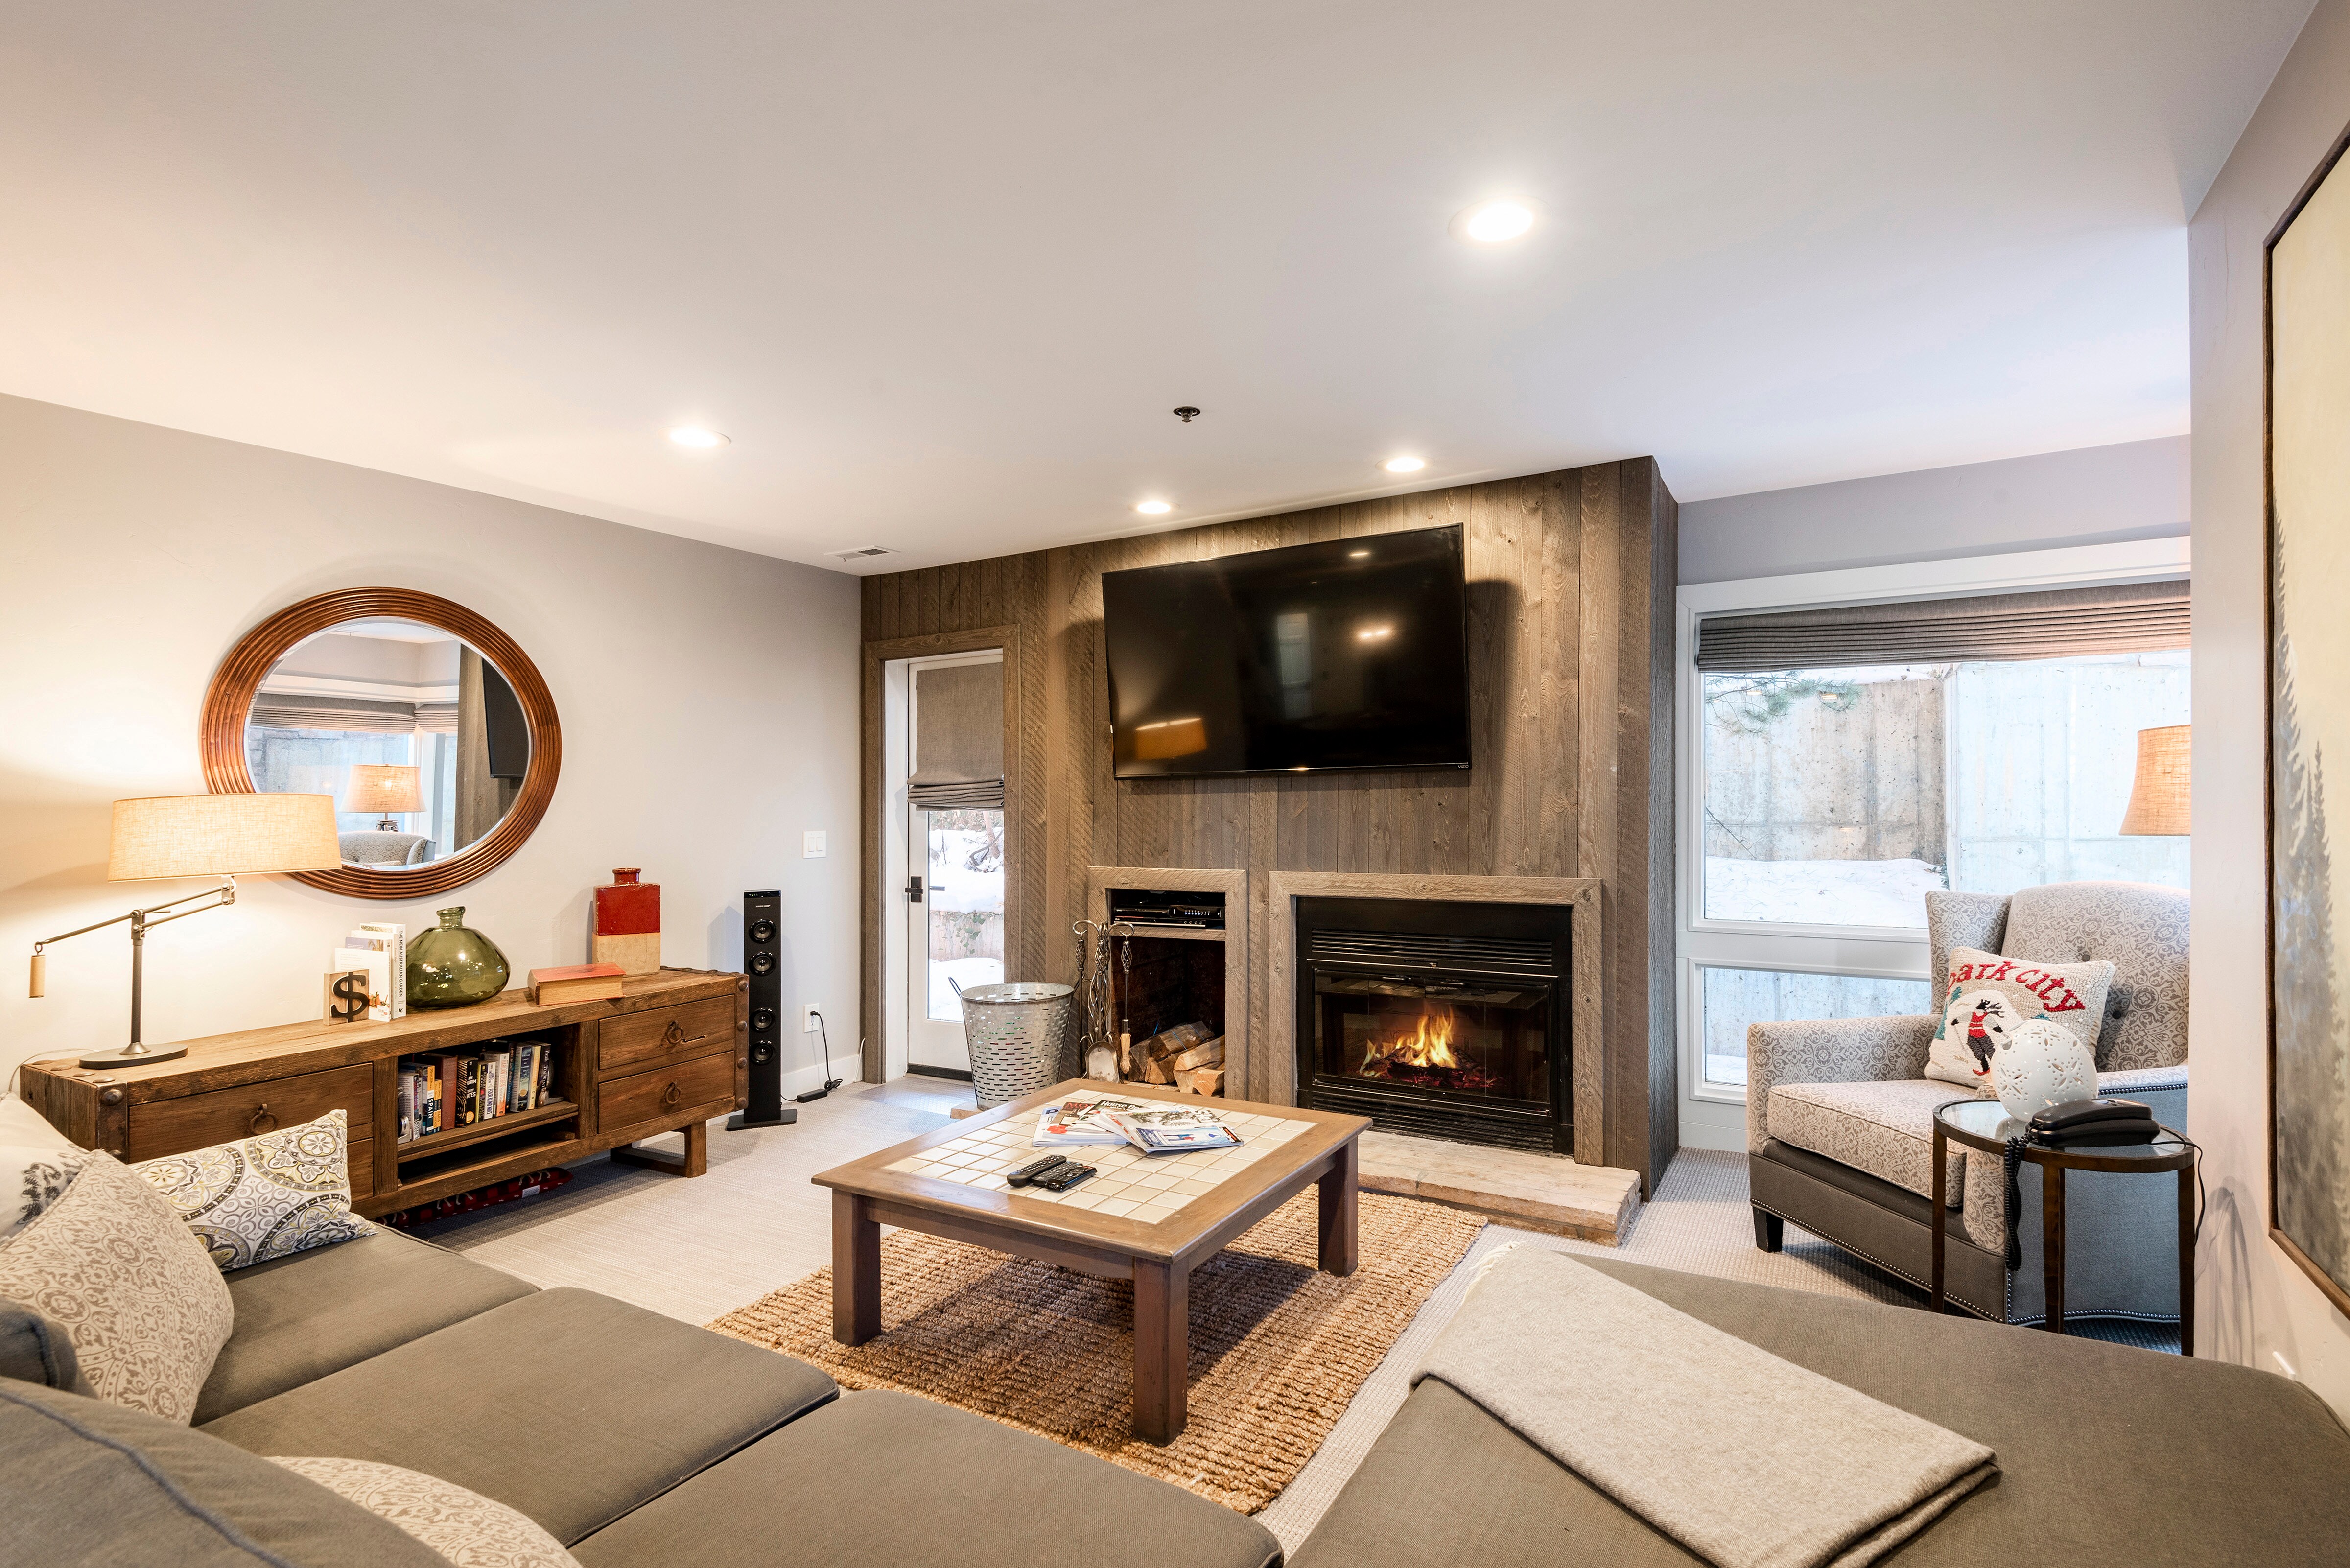 Living Room with 65" Smart TV, Wood Burning Fireplace, Patio Access, and Mountain Contemporary Furnishings